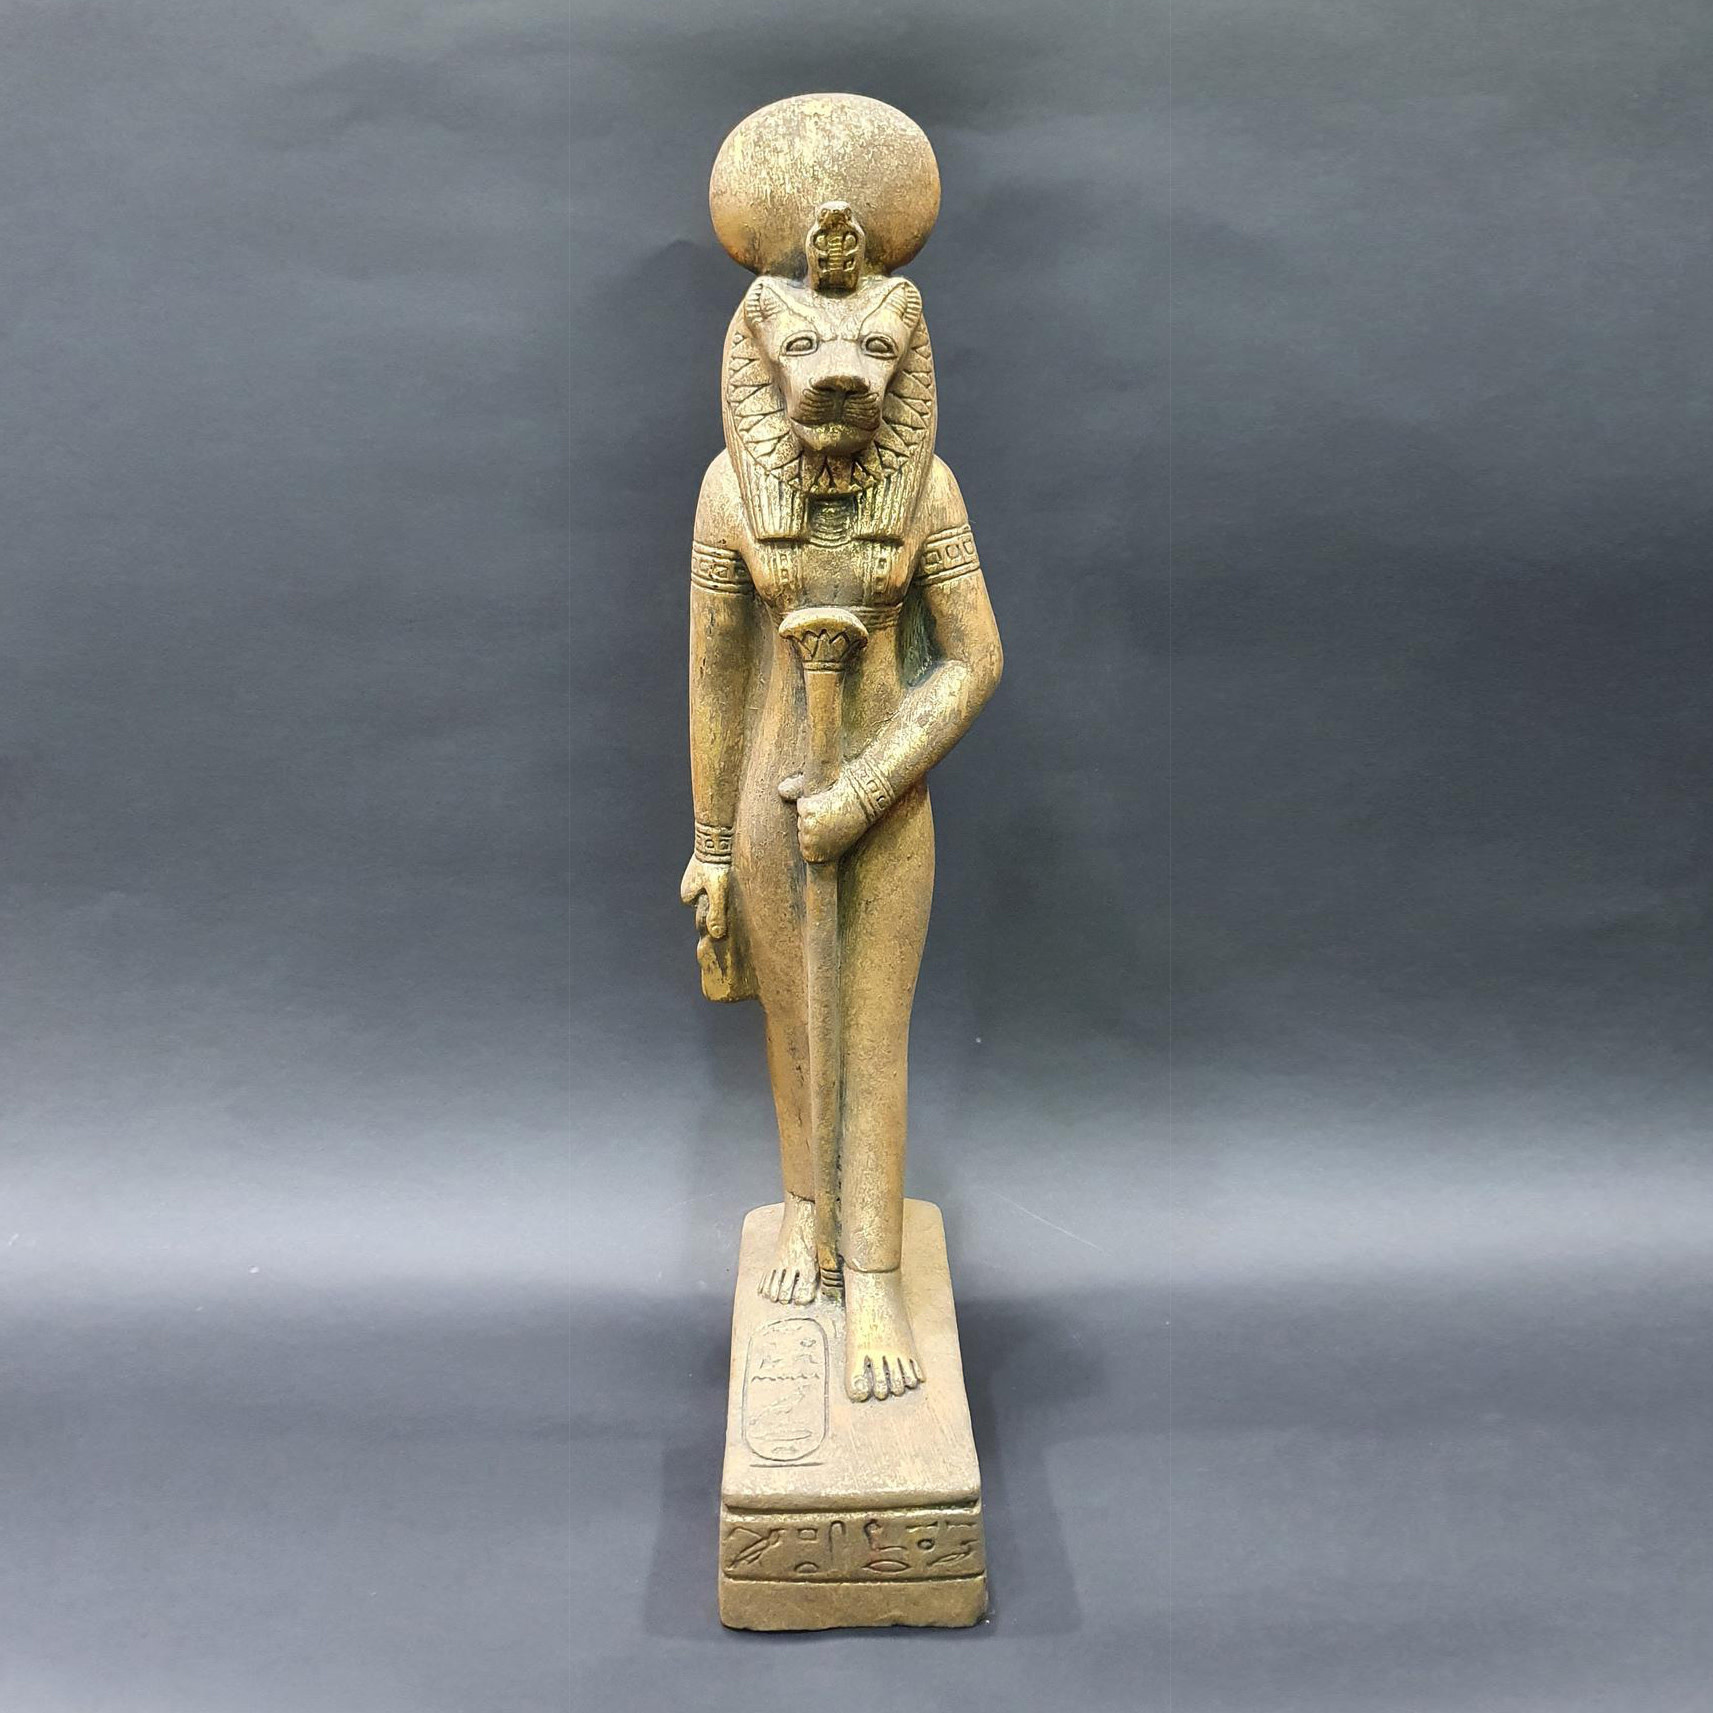 Egyptian Lioness Goddess Sekhmet Statue Inches Tall In Golden